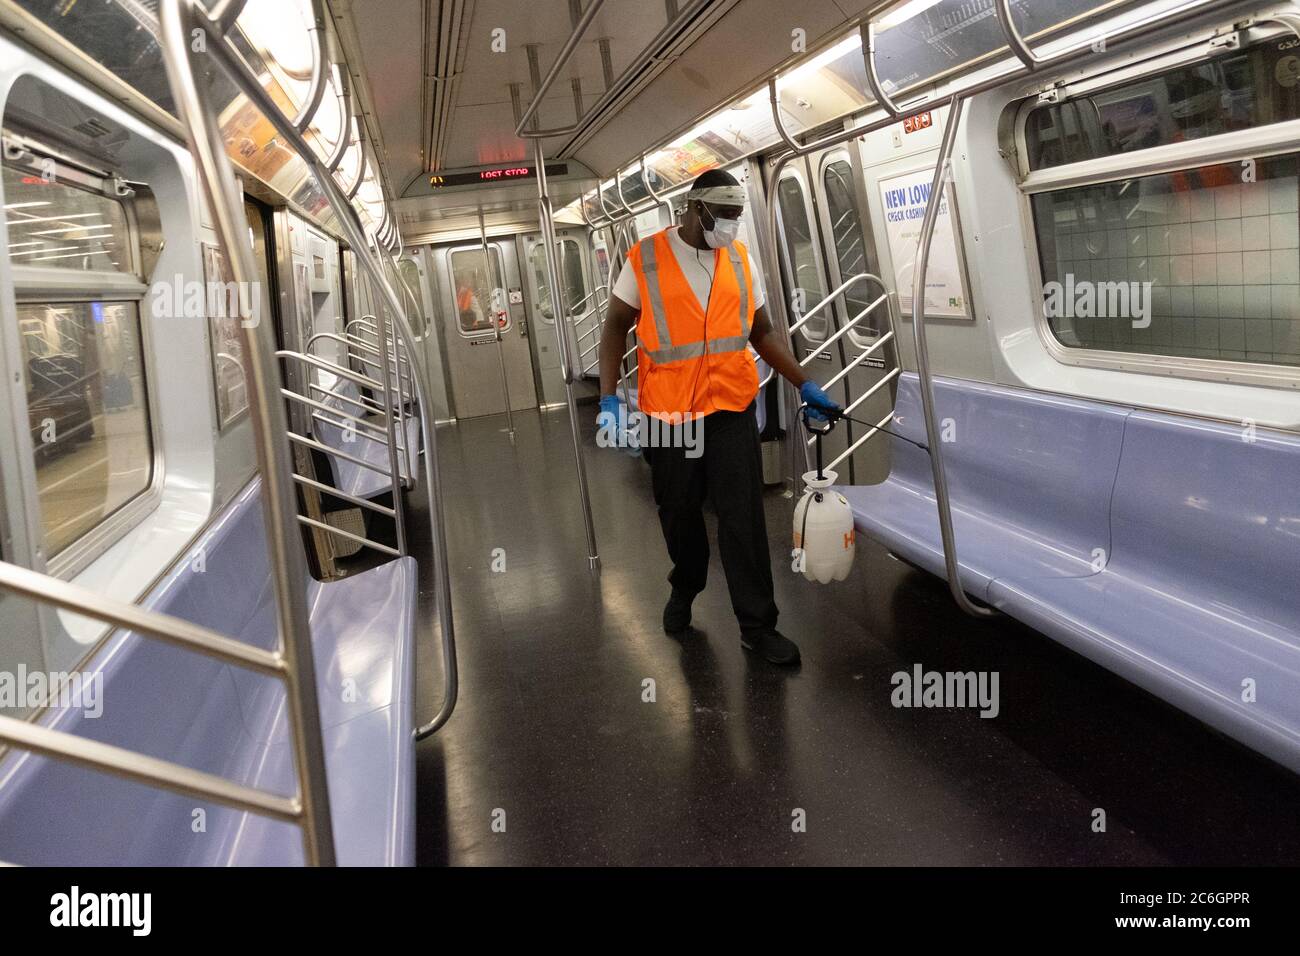 New York, United States. 08th July, 2020. A worker sprays a cleaning solution inside a subway car in Manhattan as the city enters phase 3 of reopening amid the coronavirus pandemic.As New York City enters phase 3 of reopening retail stores for indoor shopping, restaurants have been postponed for indoor dinning. Meanwhile Black Lives Matter protests continue in the city as the Mayor along with a group of people painted a large Black Lives Matter mural in front of Trump Tower on 5th Ave. Credit: SOPA Images Limited/Alamy Live News Stock Photo